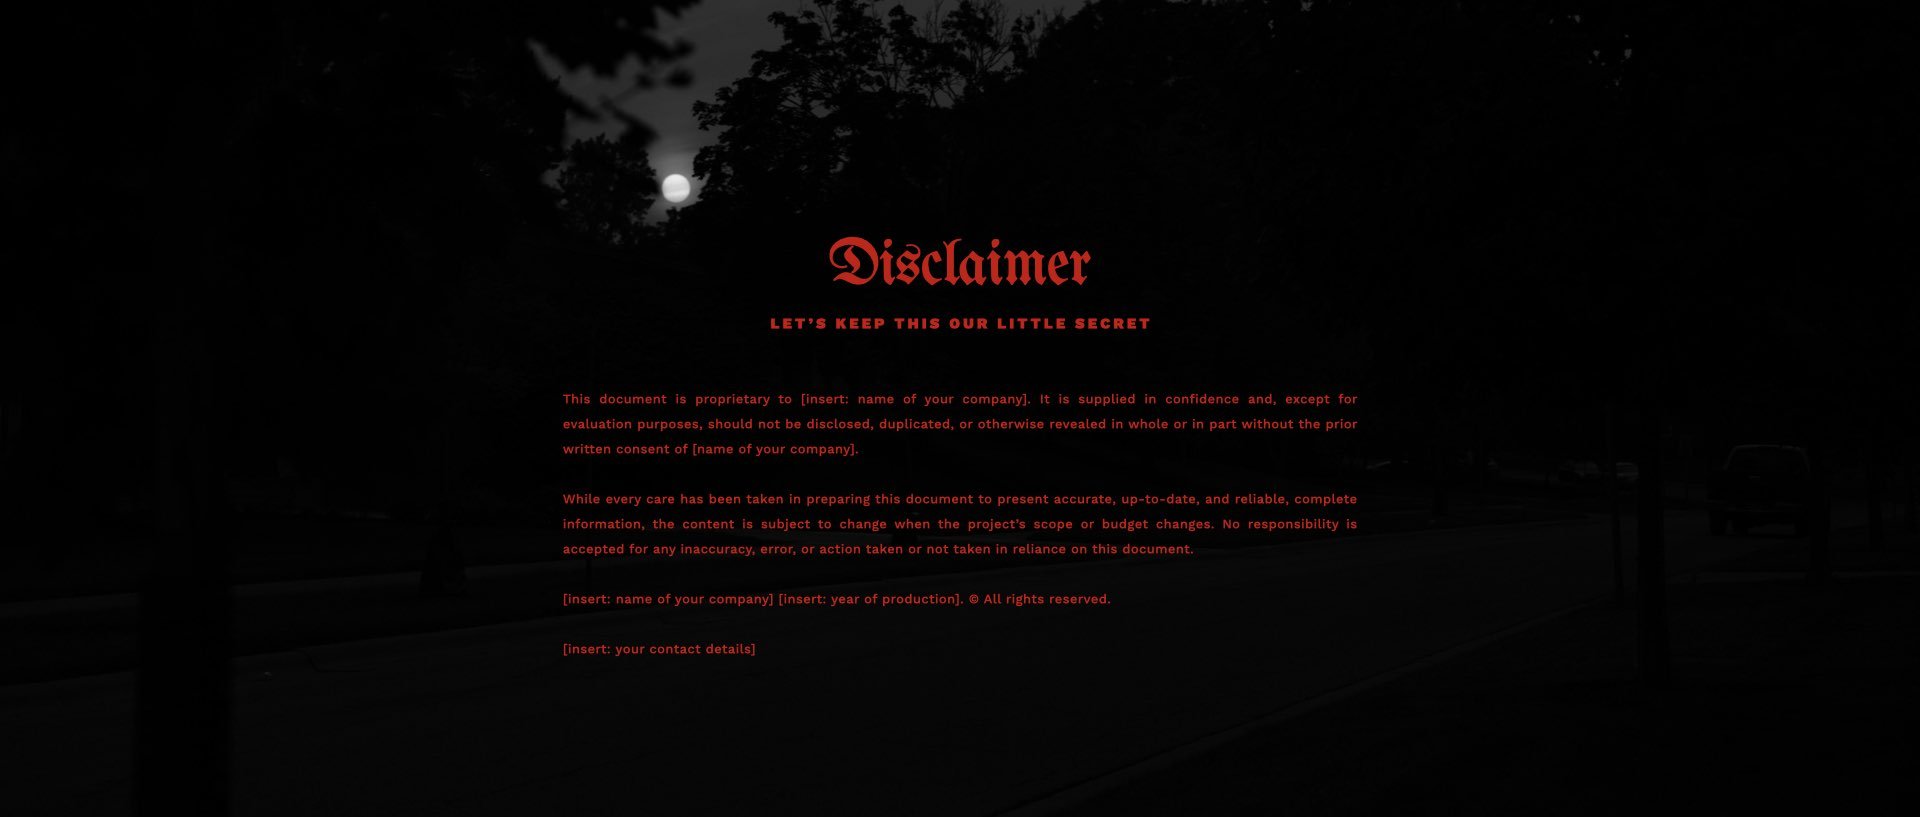 ‎Film Pitch Deck Template - Sinister Obsession.‎037.jpeg